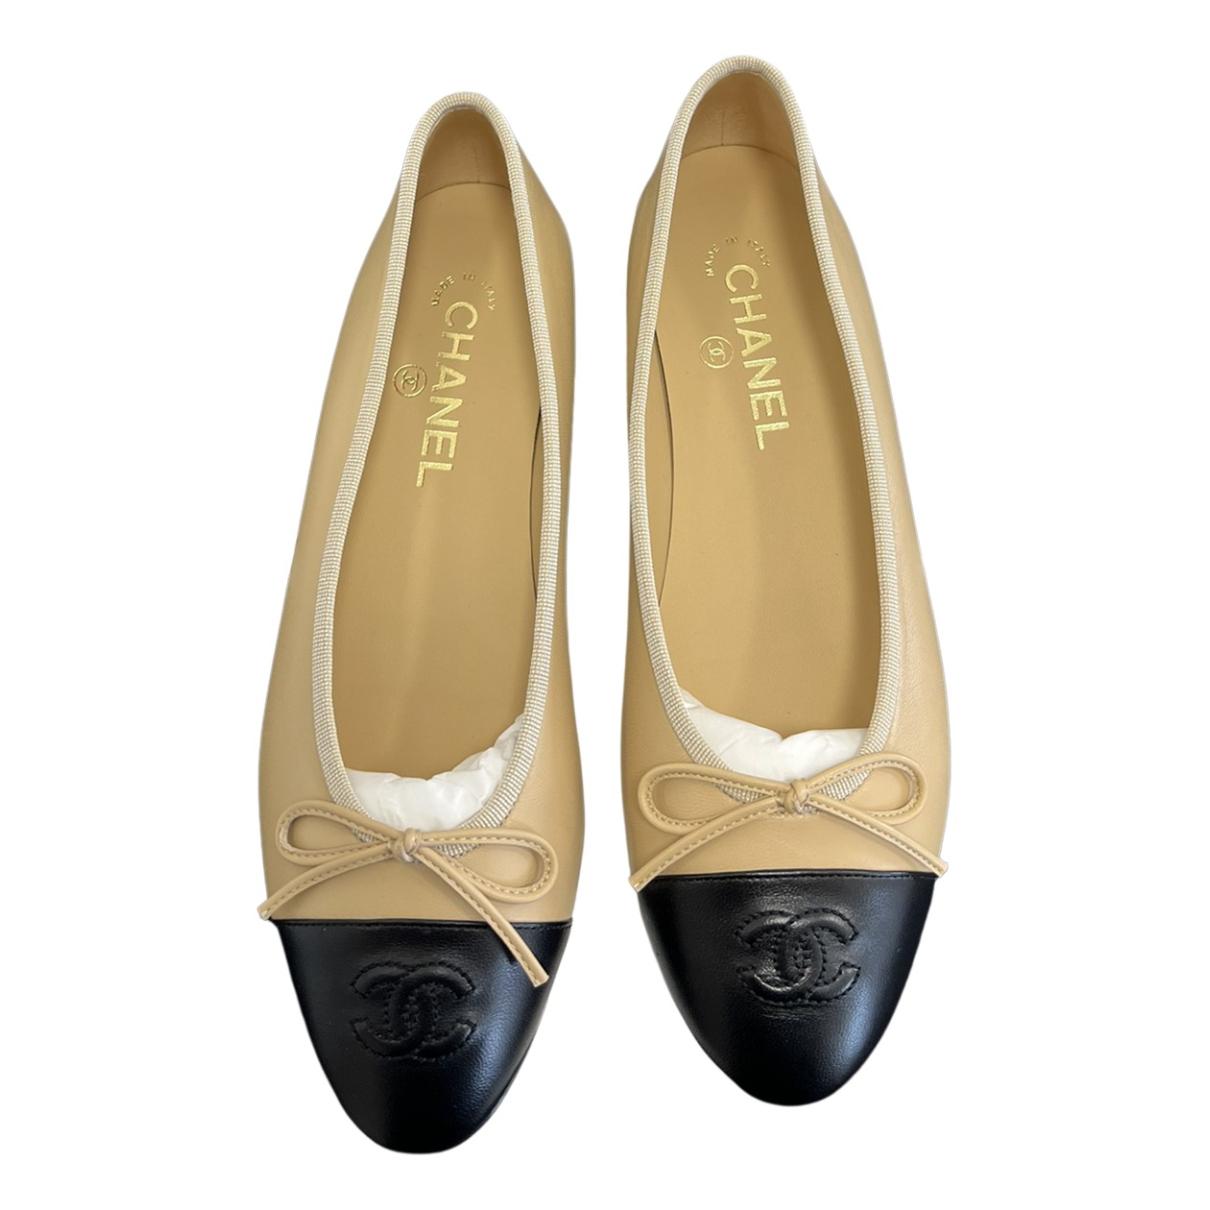 Cambon leather ballet flats Chanel Beige size 39 EU in Leather - 38990223